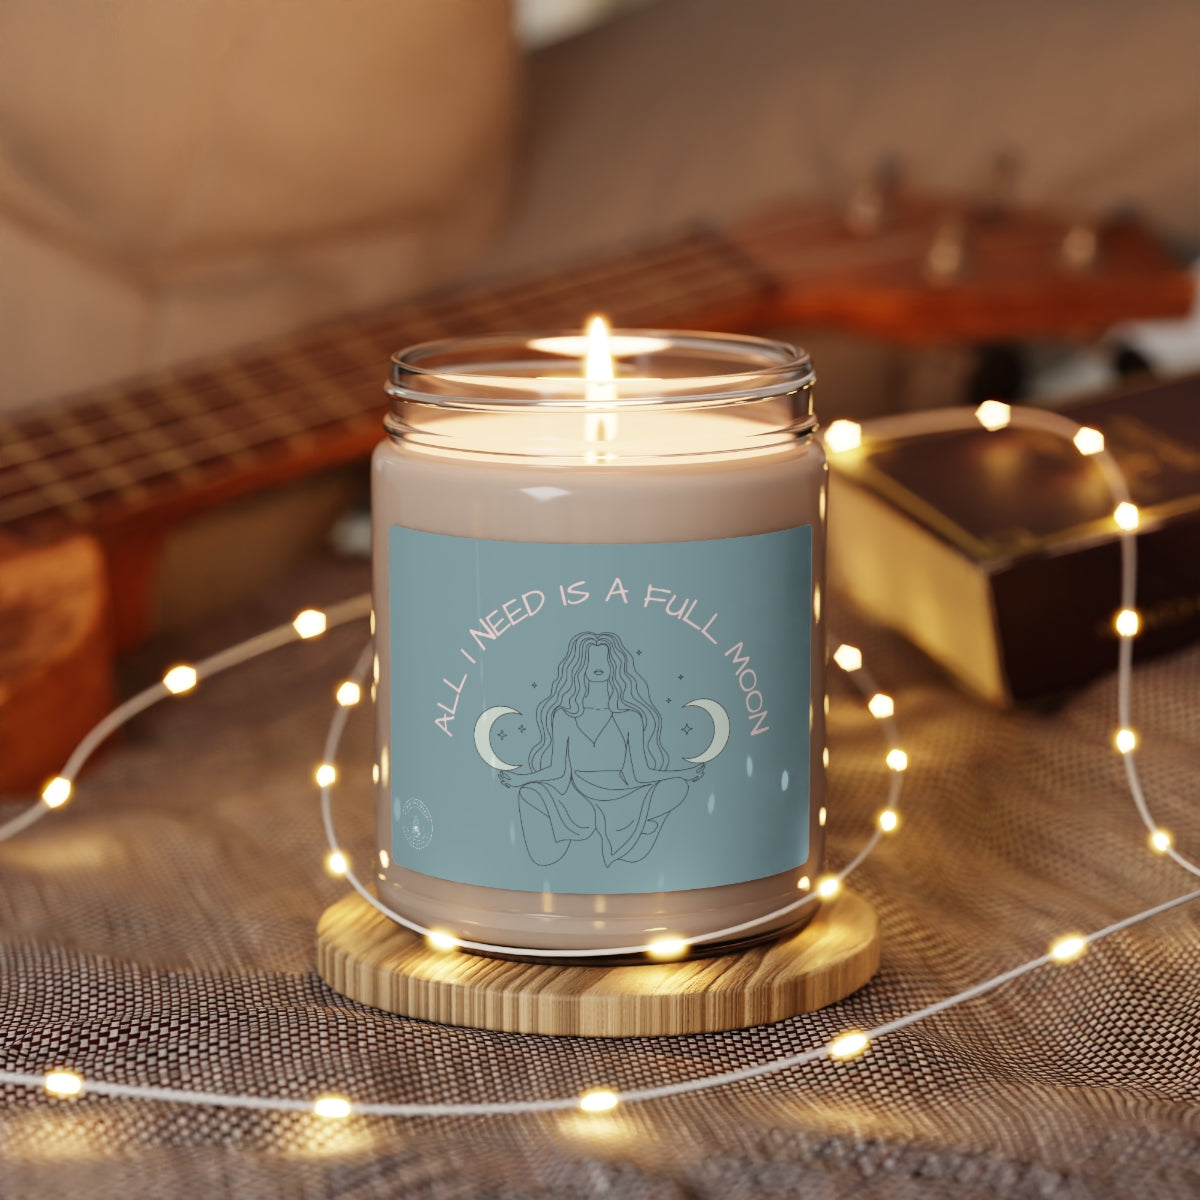 Healing Candles - All I Need Is A Full Moon  3